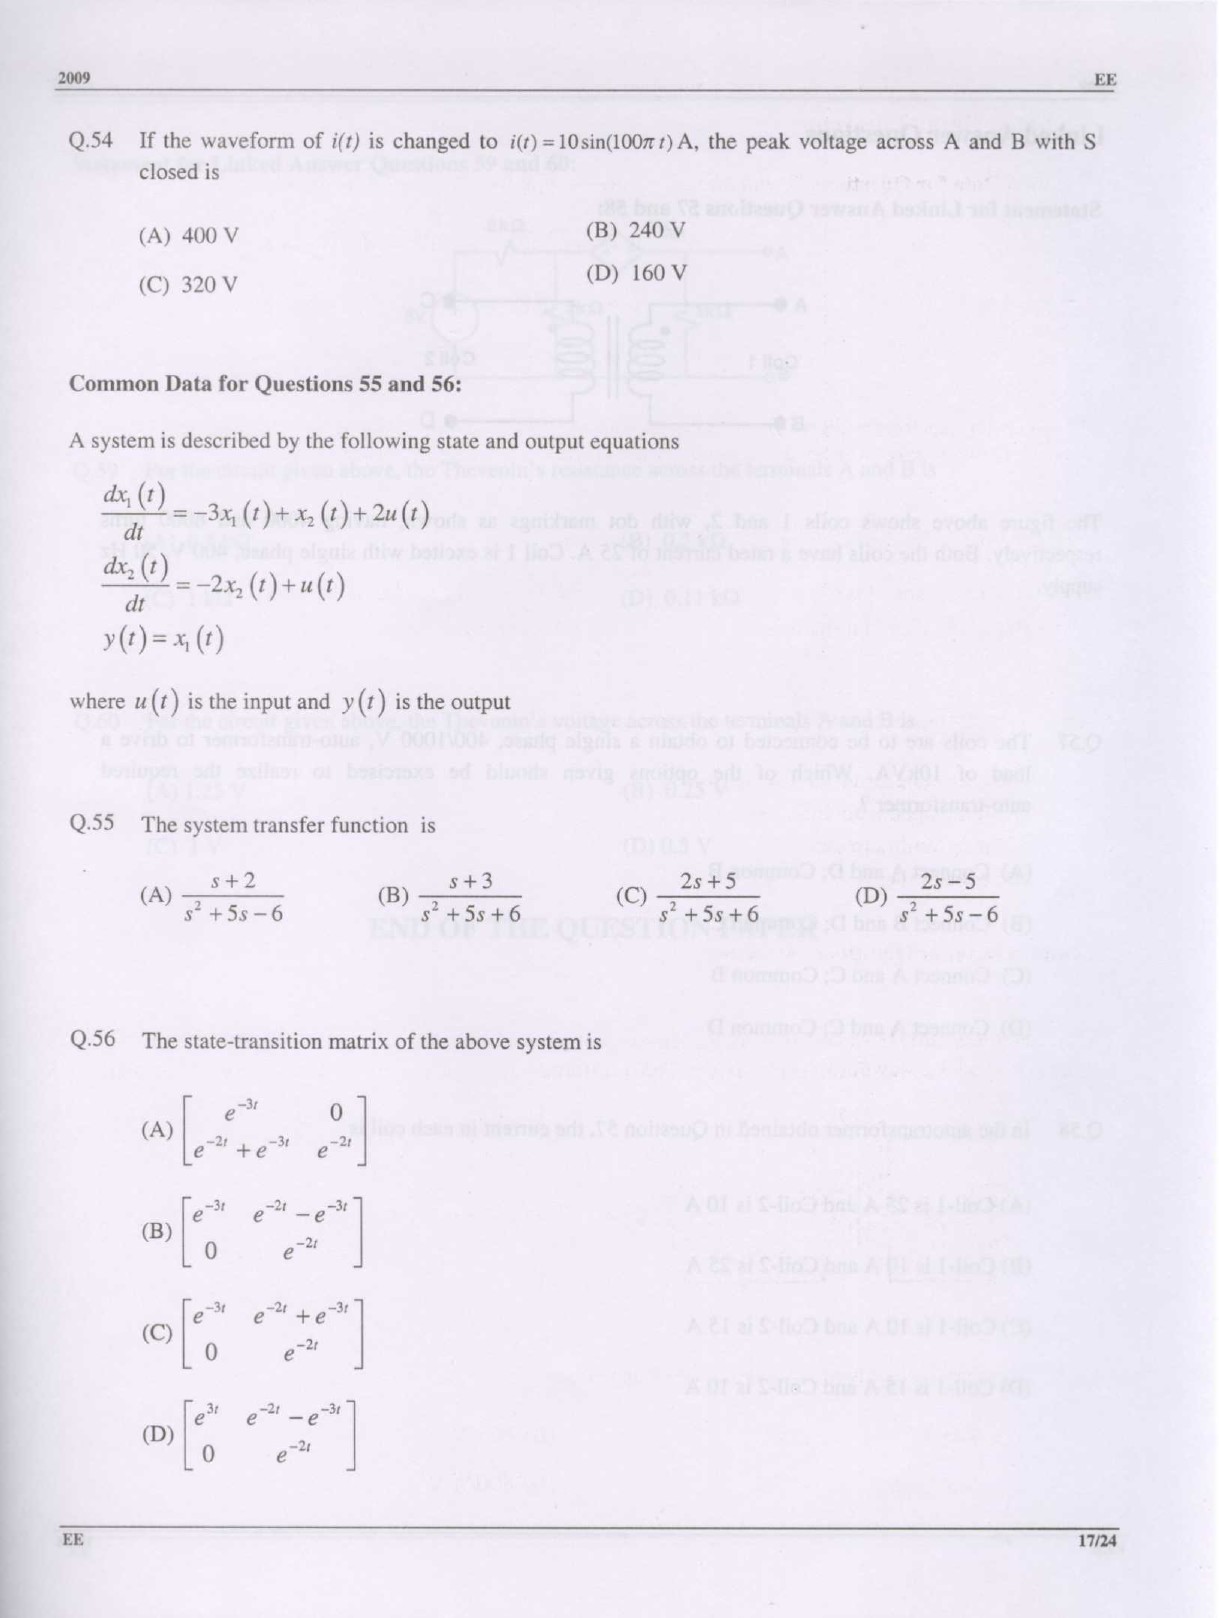 GATE Exam Question Paper 2009 Electrical Engineering 17